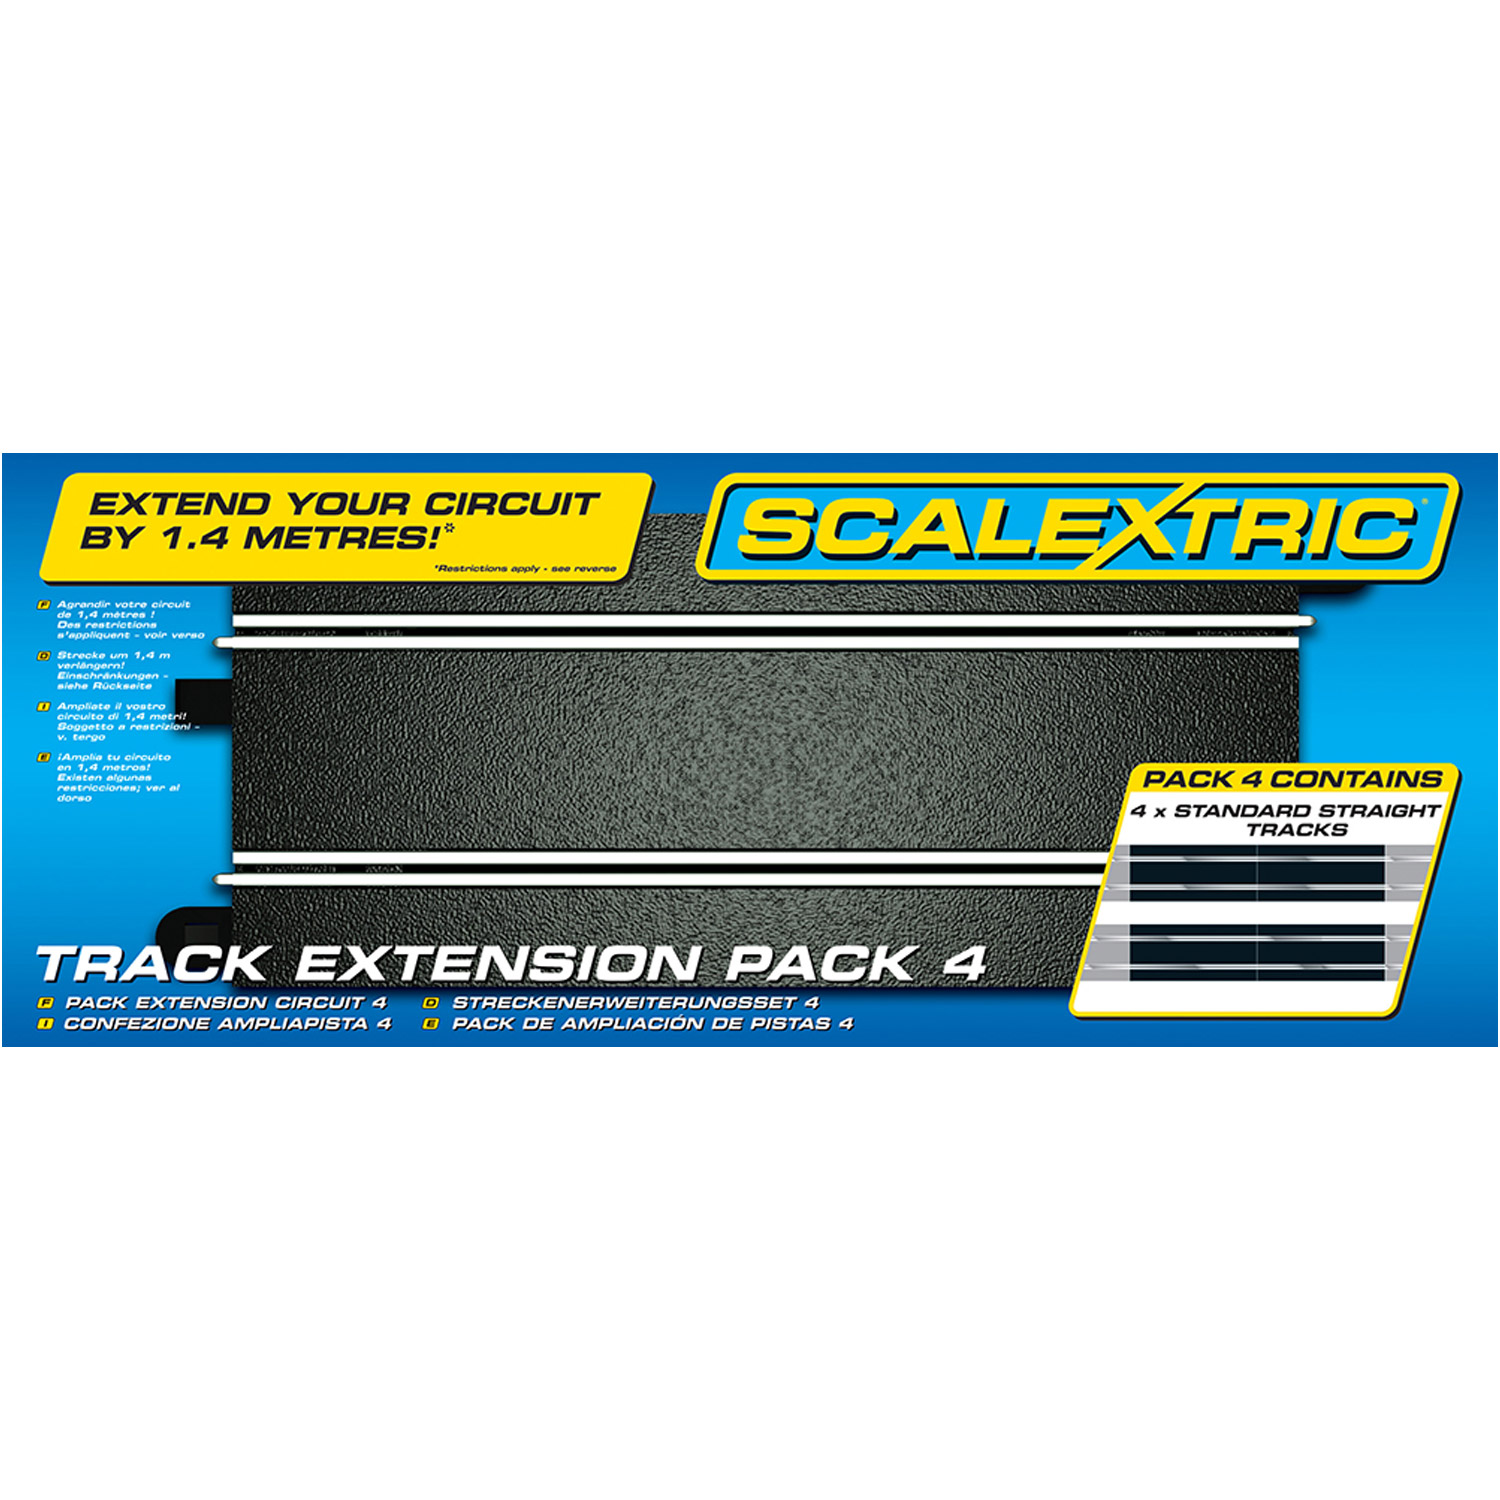 Extended tracks. Scalextric track. Braid to Scalextric. WAVEGO Extension Pack.